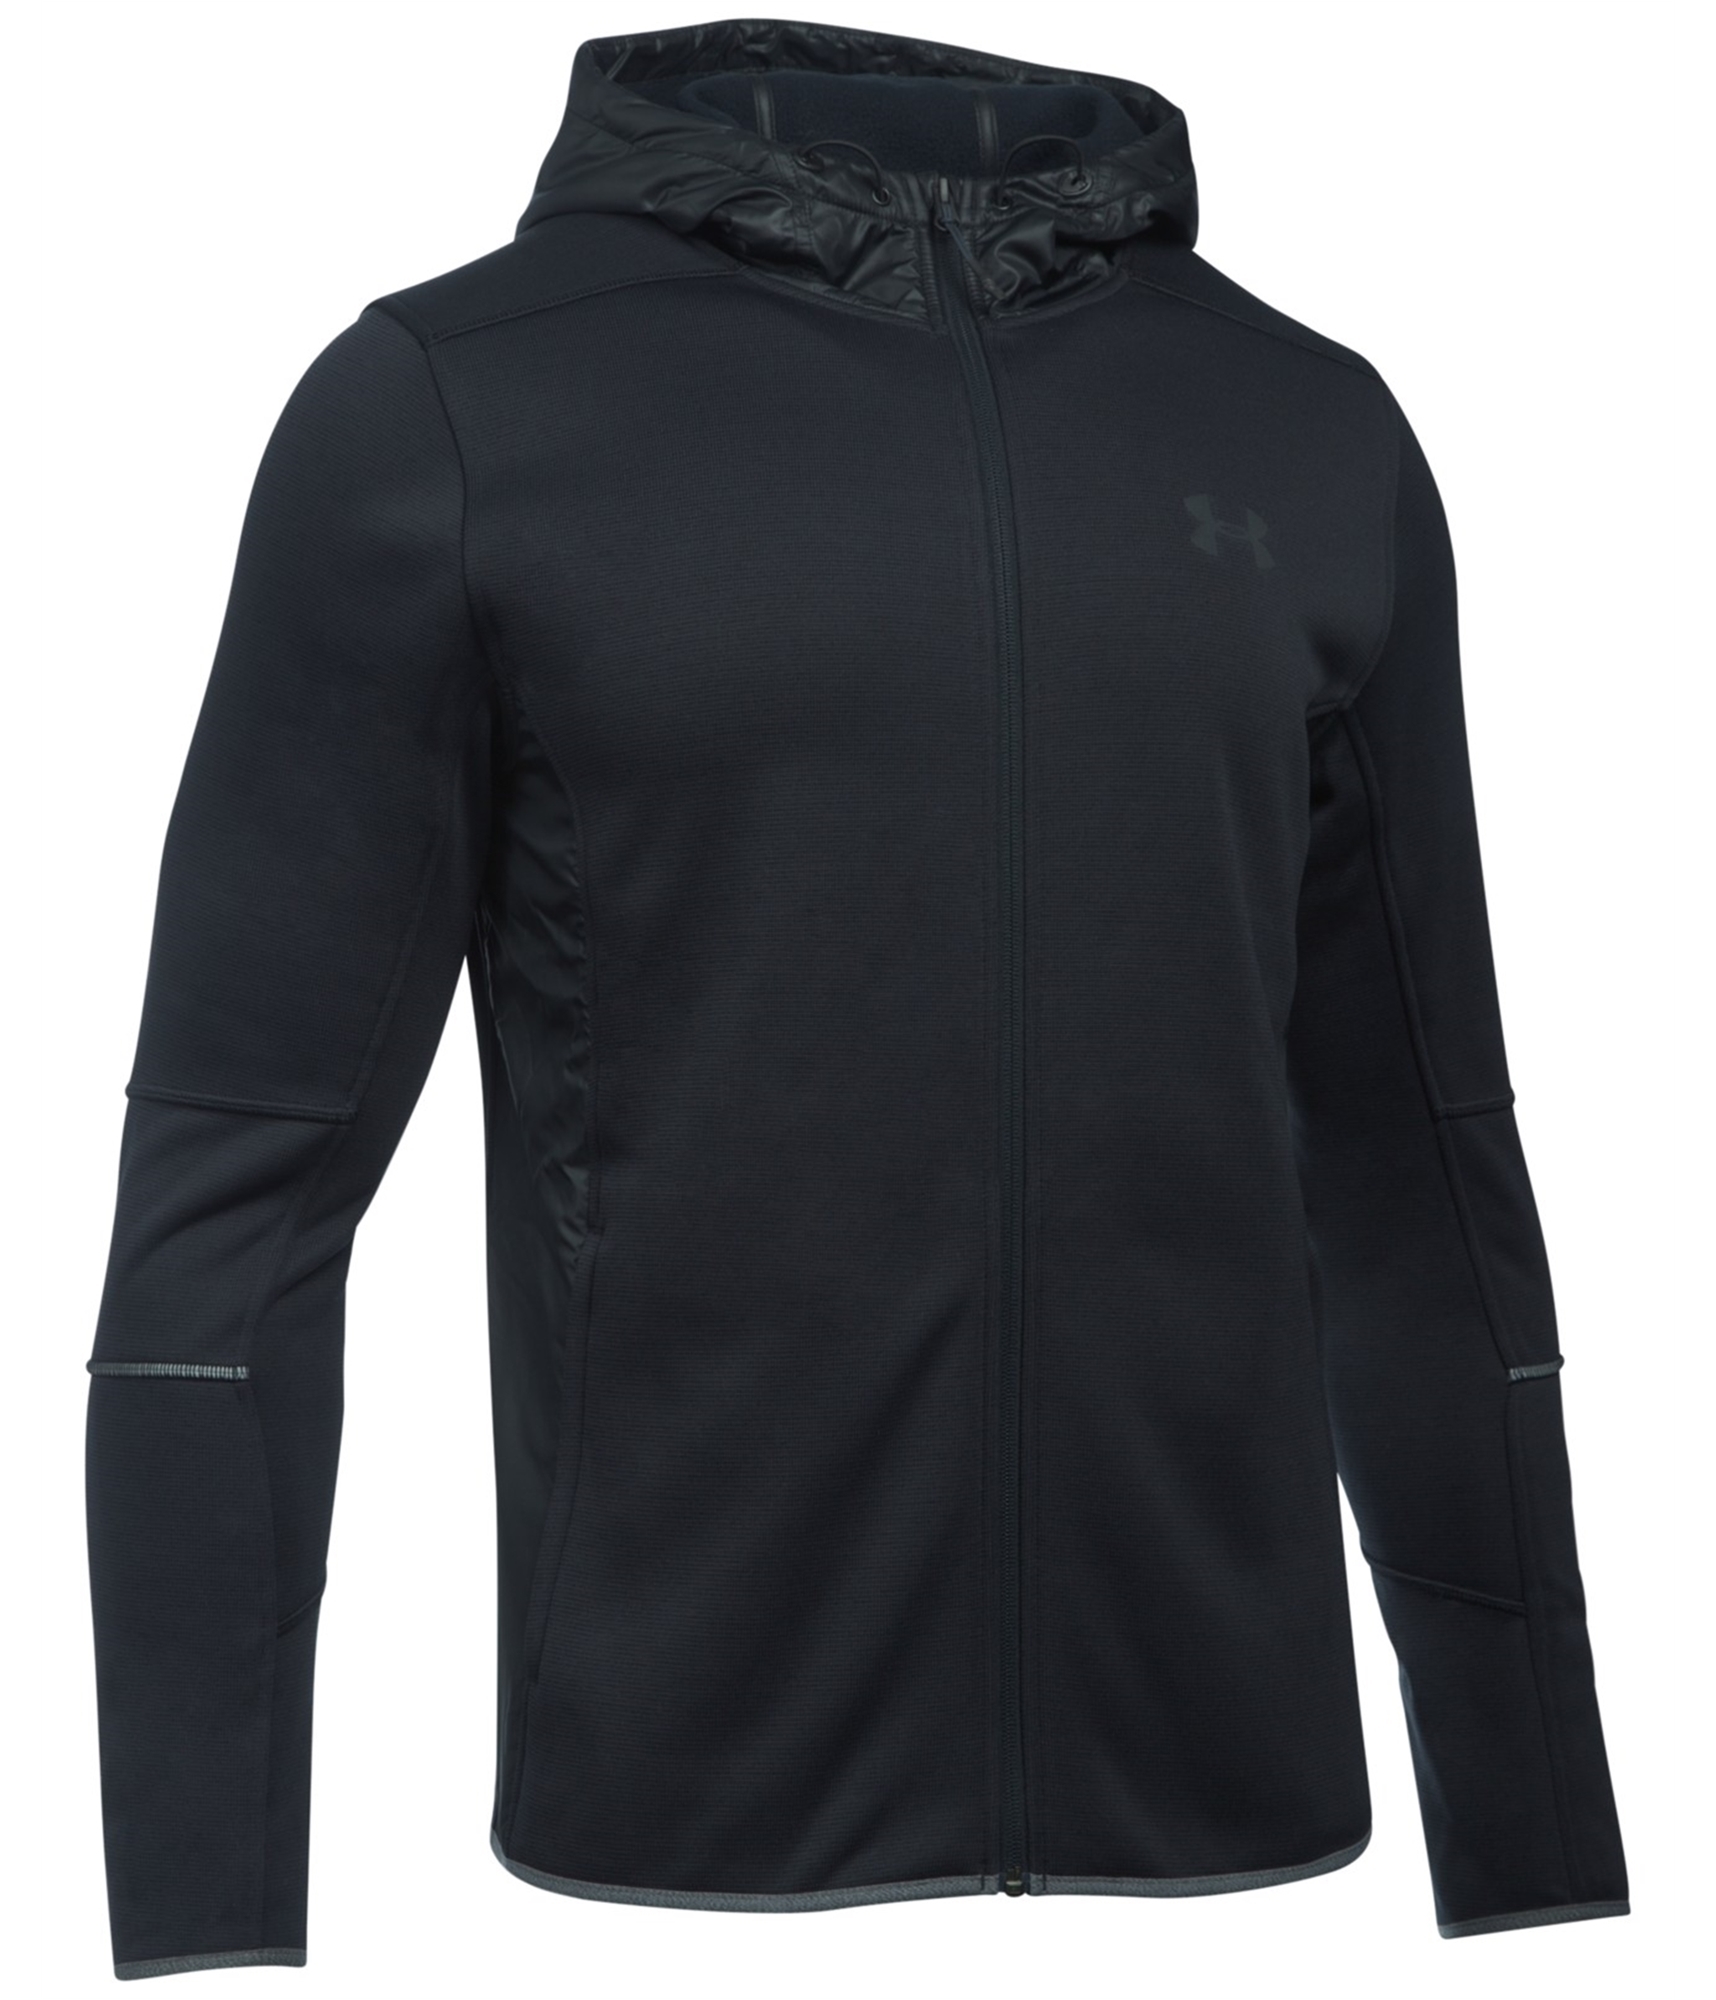 Buy a Under Armour Mens Storm Swacket Jacket | Tagsweekly